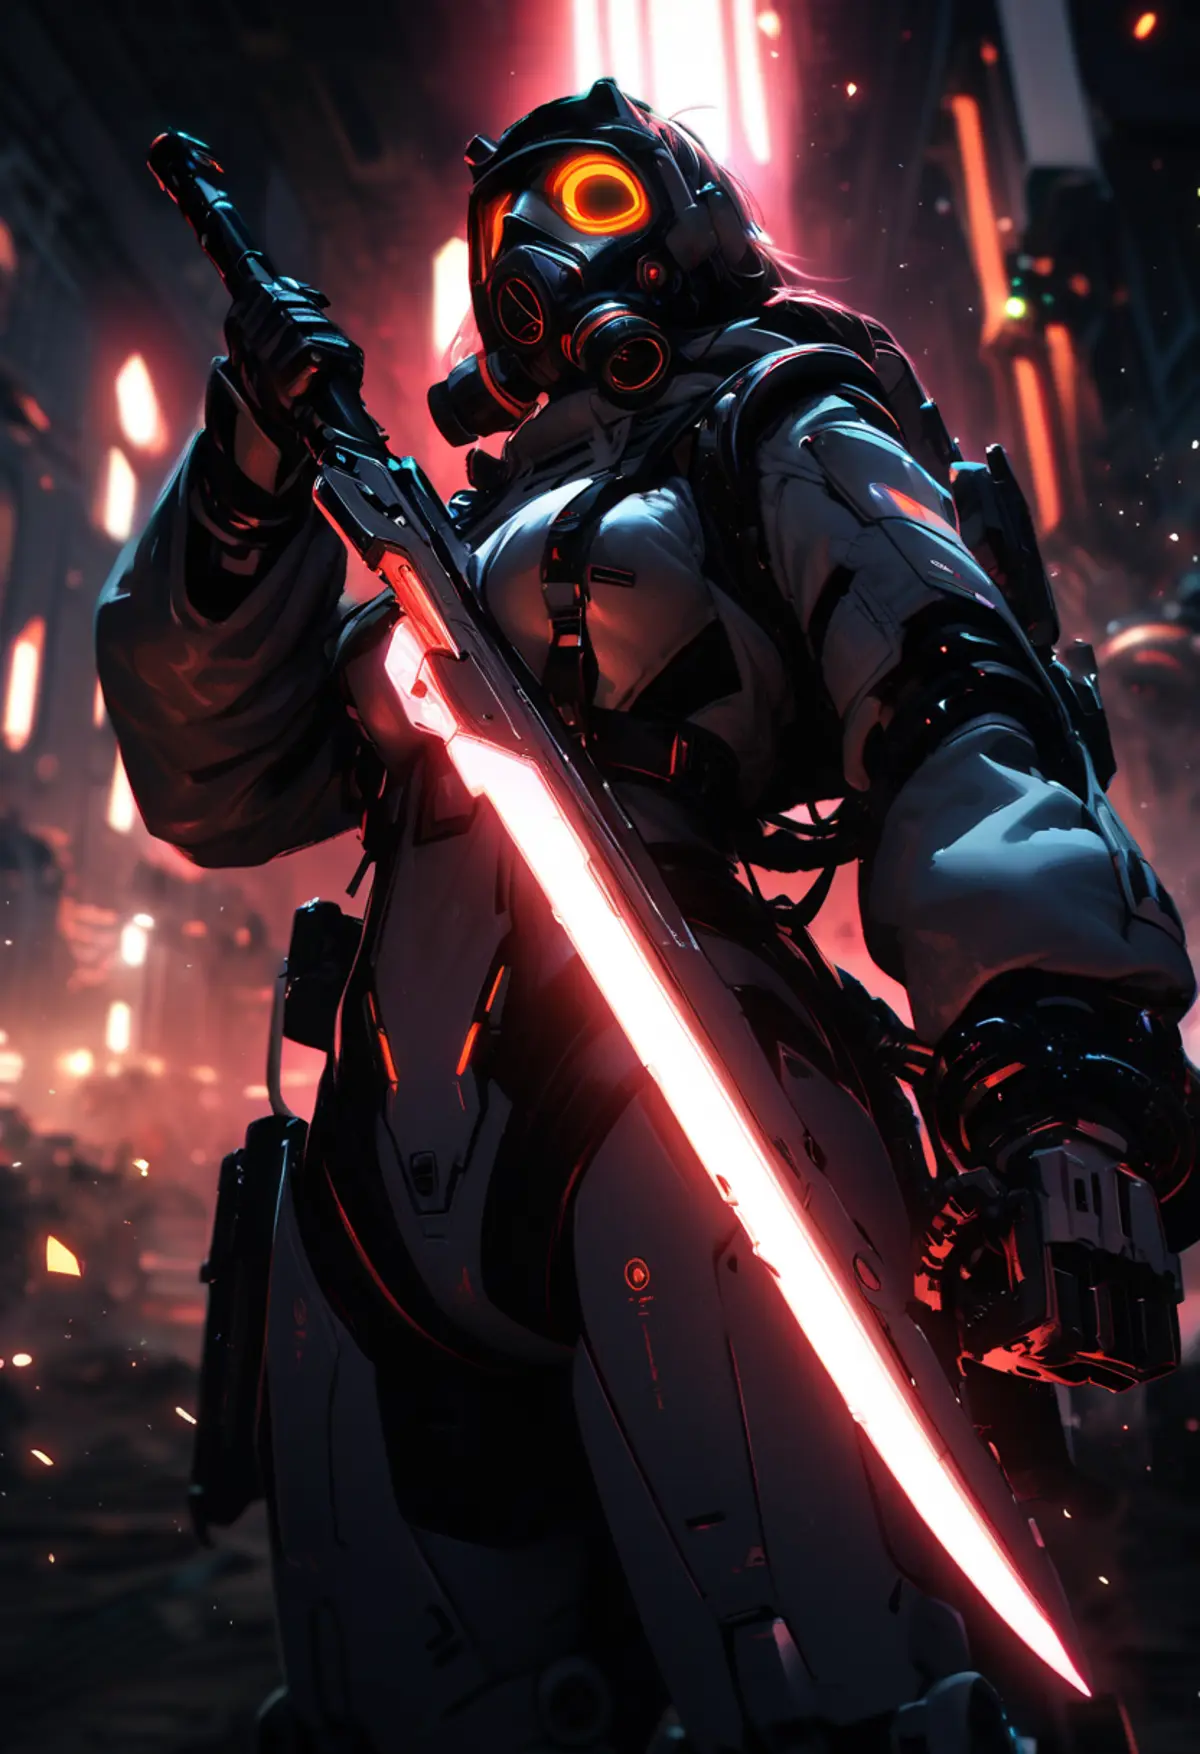 A futuristic warrior in an urban setting. The character is clad in heavy, detailed armor with glowing orange elements. The warrior wields a long sword that emits a bright red glow. 